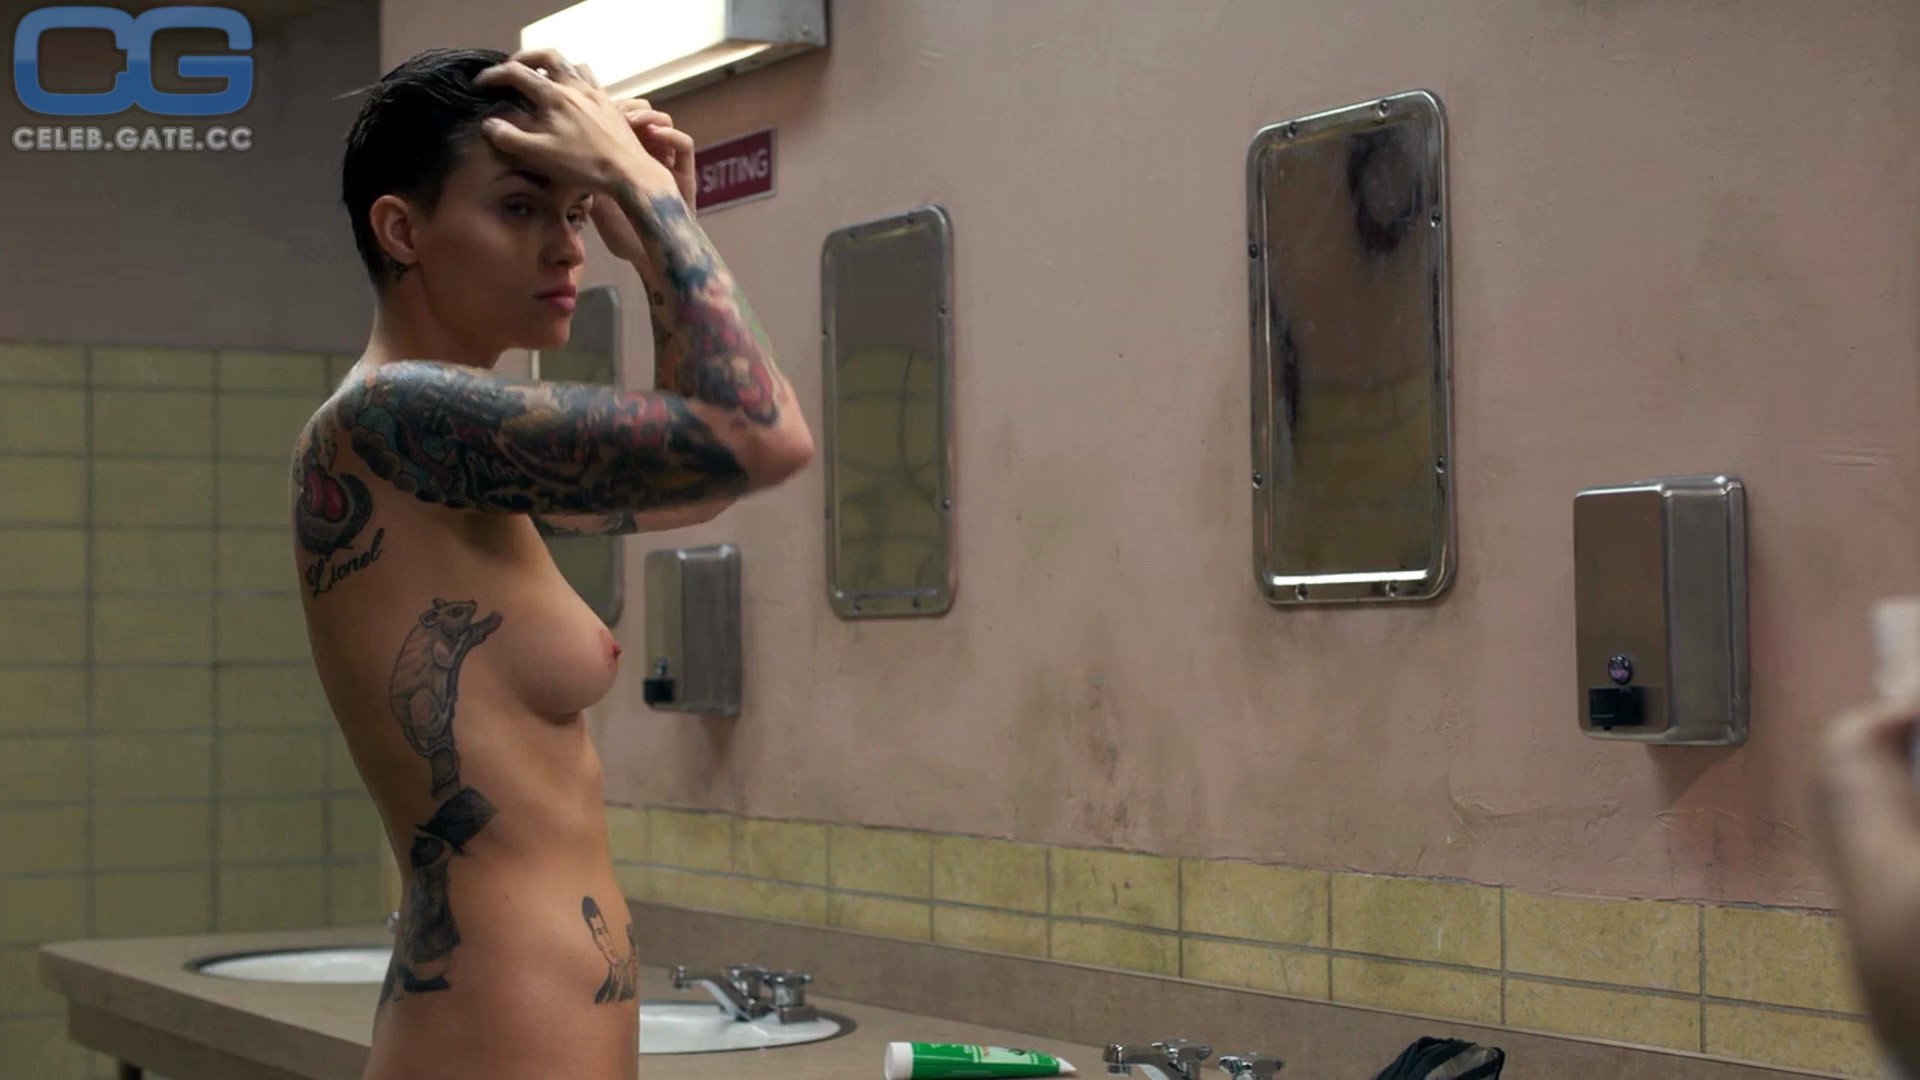 Naked pics of ruby rose